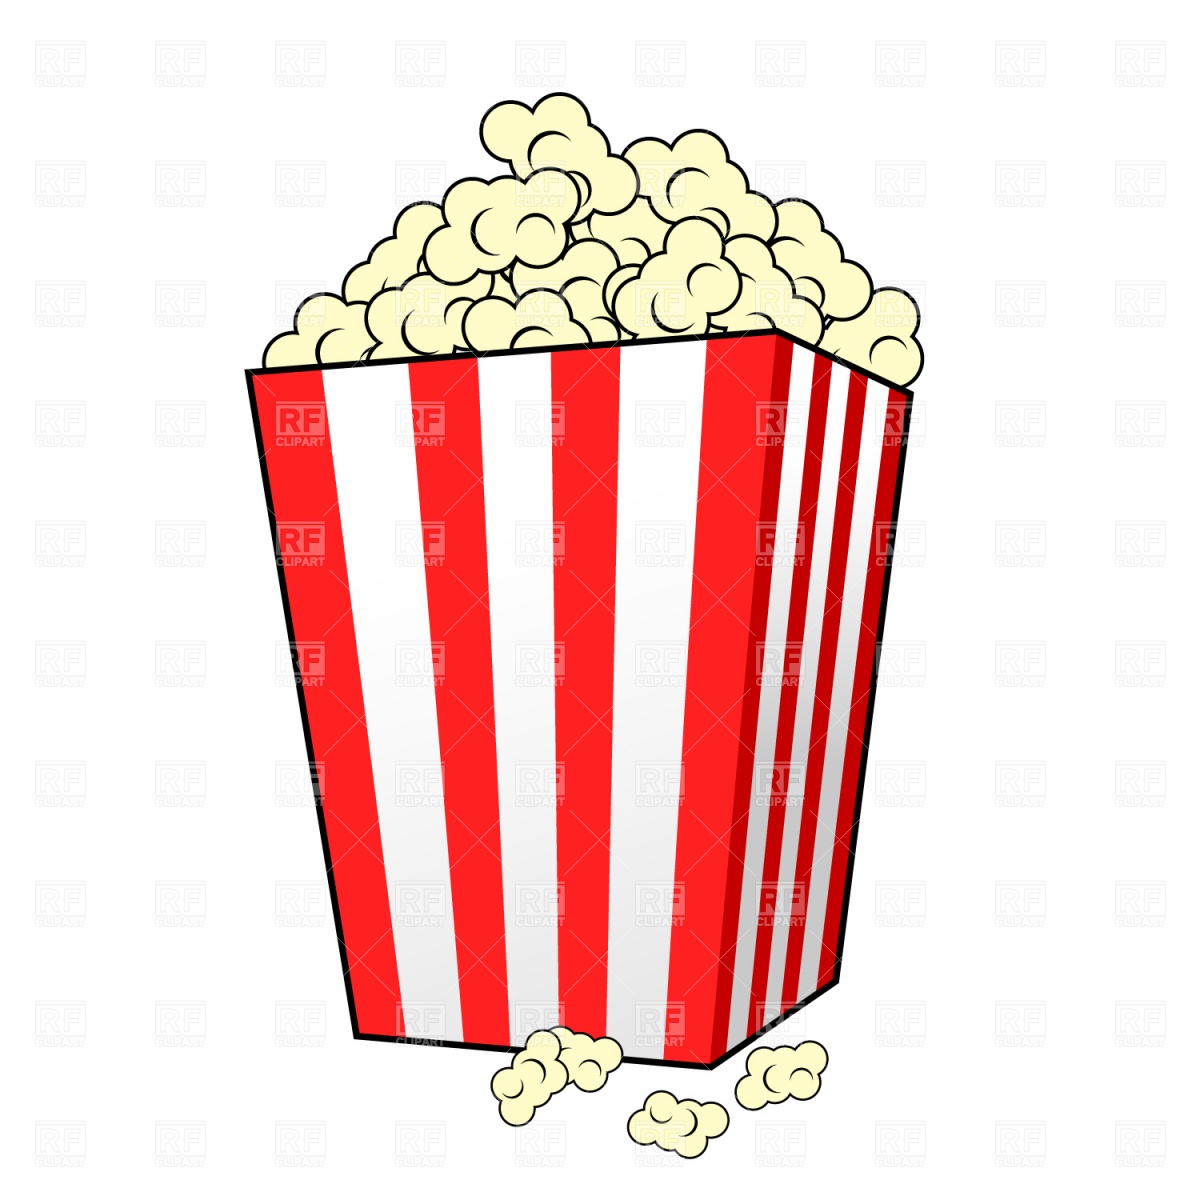 Popcorn 934 Food And Beverages Download Royalty Free Vector Clipart